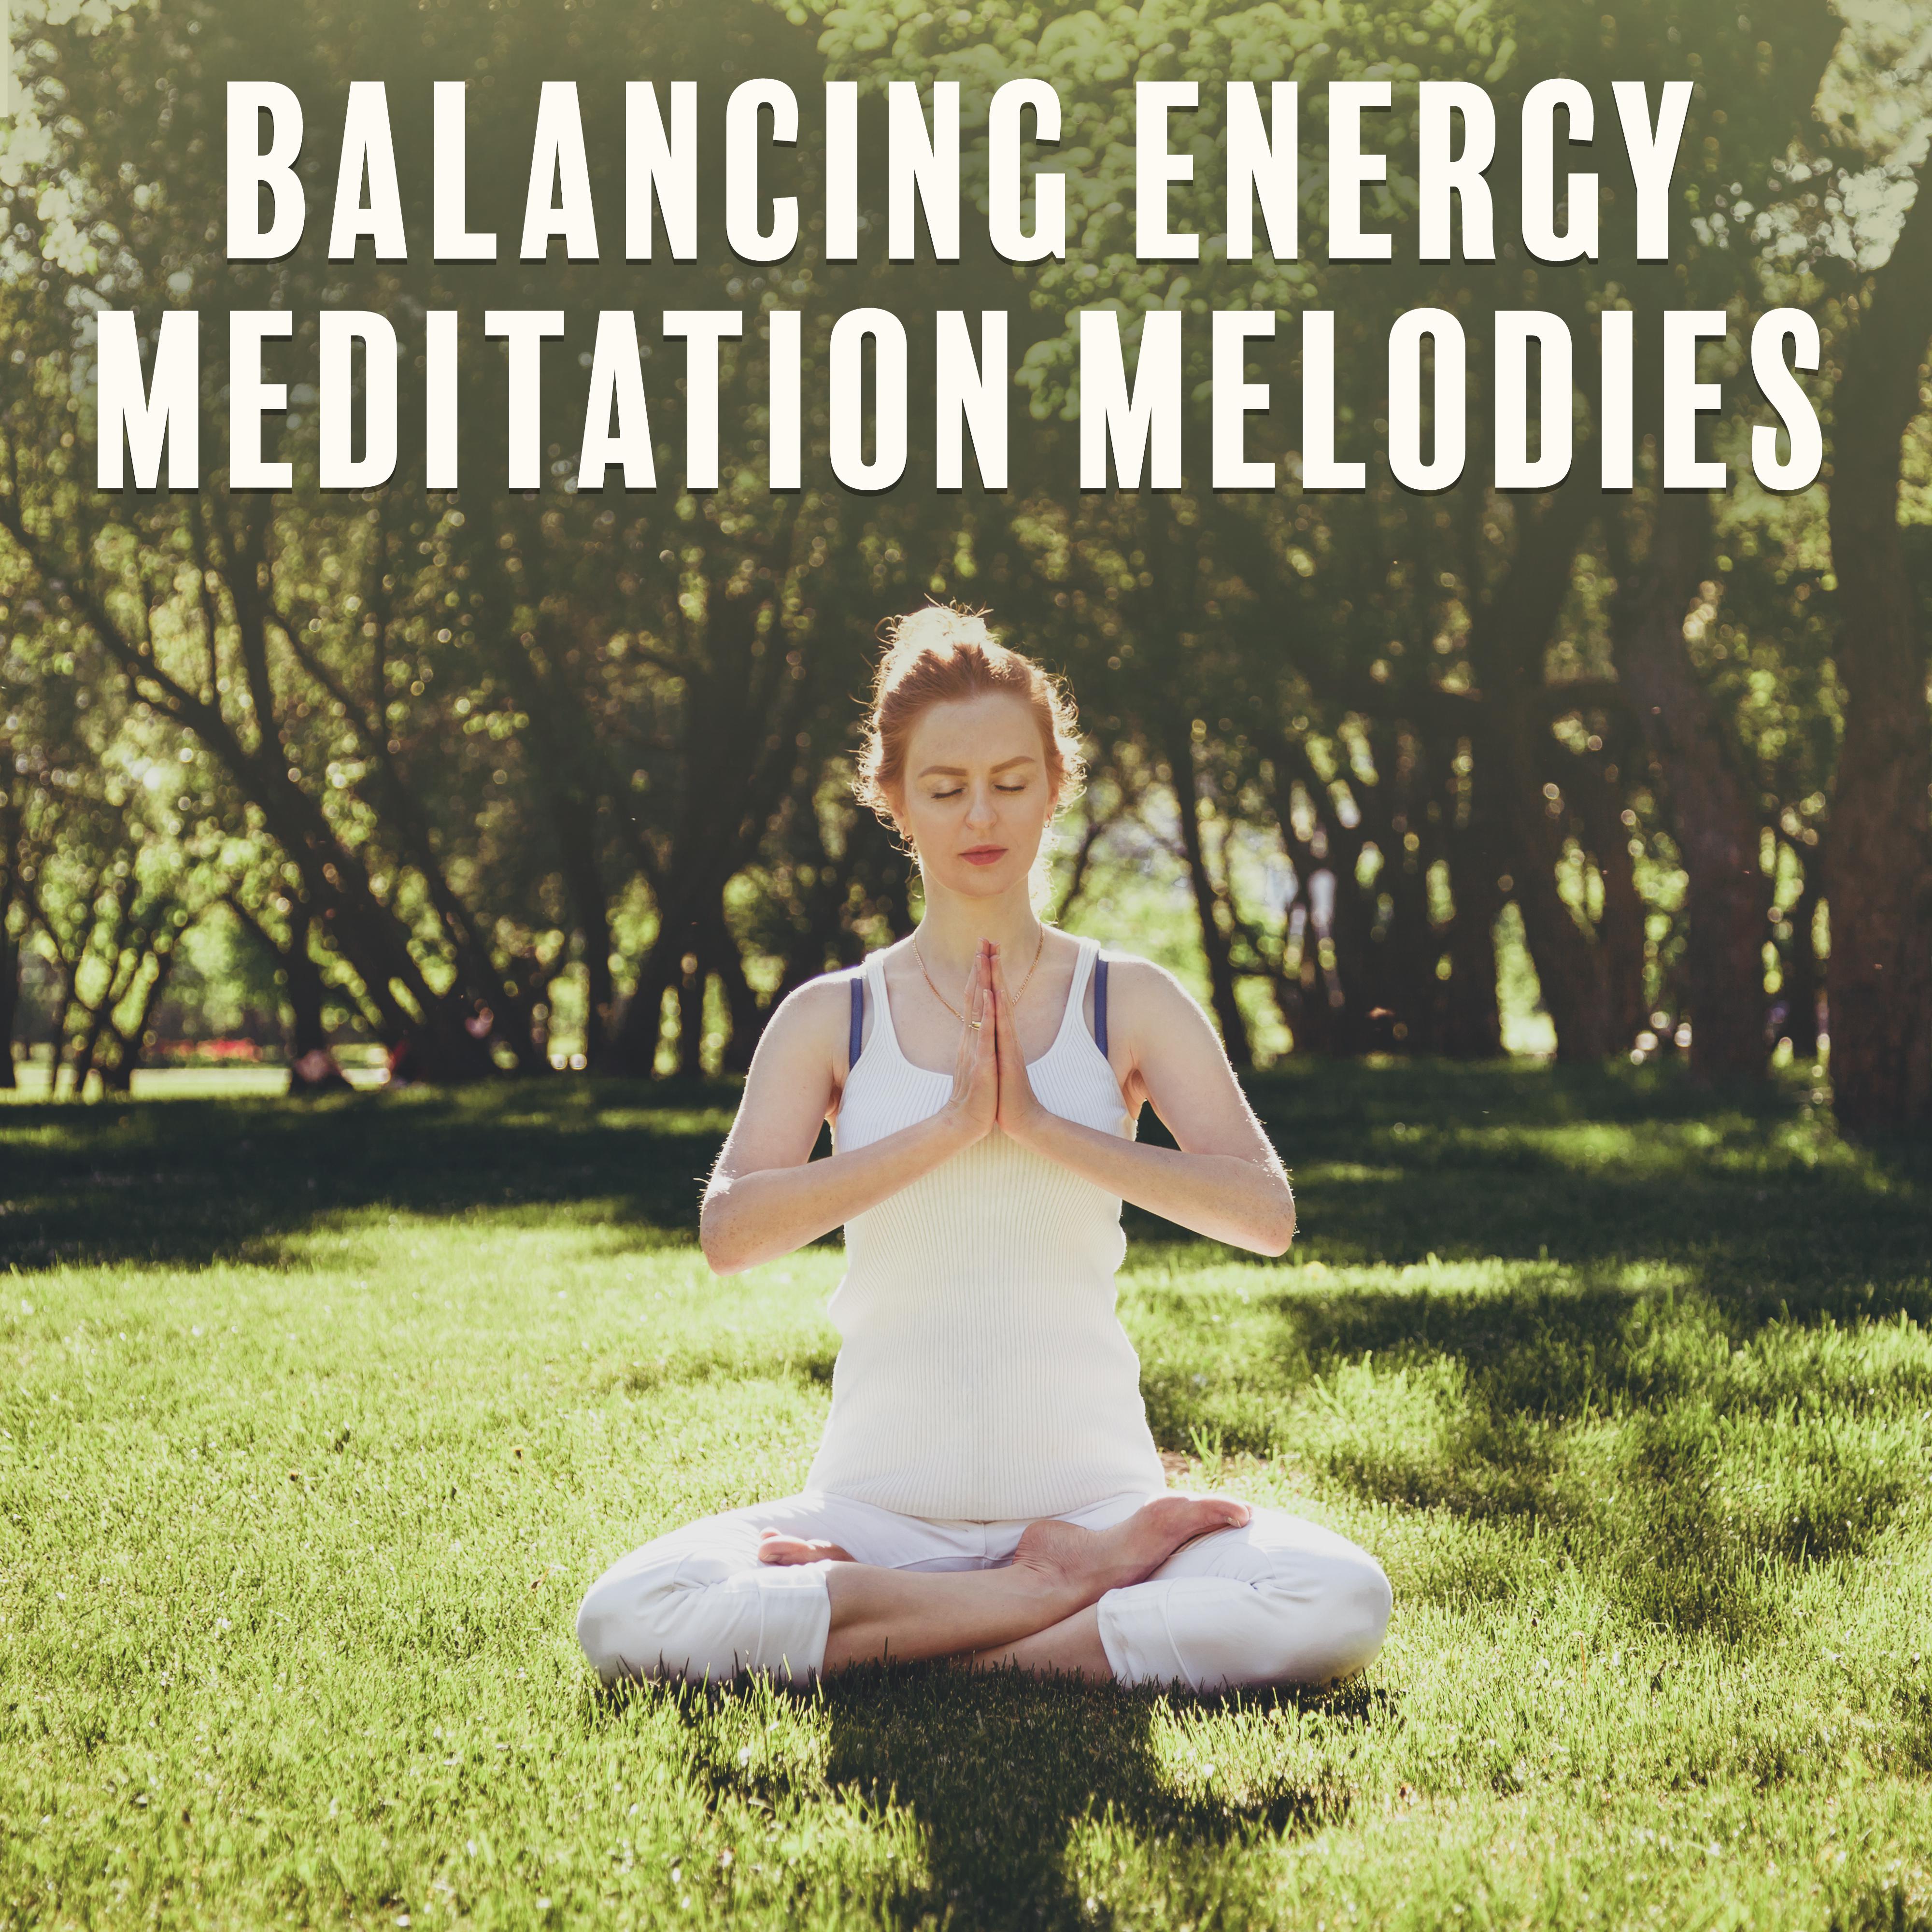 Balancing Energy Meditation Melodies: 15 New Age Deep Ambient Songs for Yoga & Spiritual Relaxation, Healing Charkas, Inner Energy Increase, Zen Music, Body and Soul Connection, New Music 2019